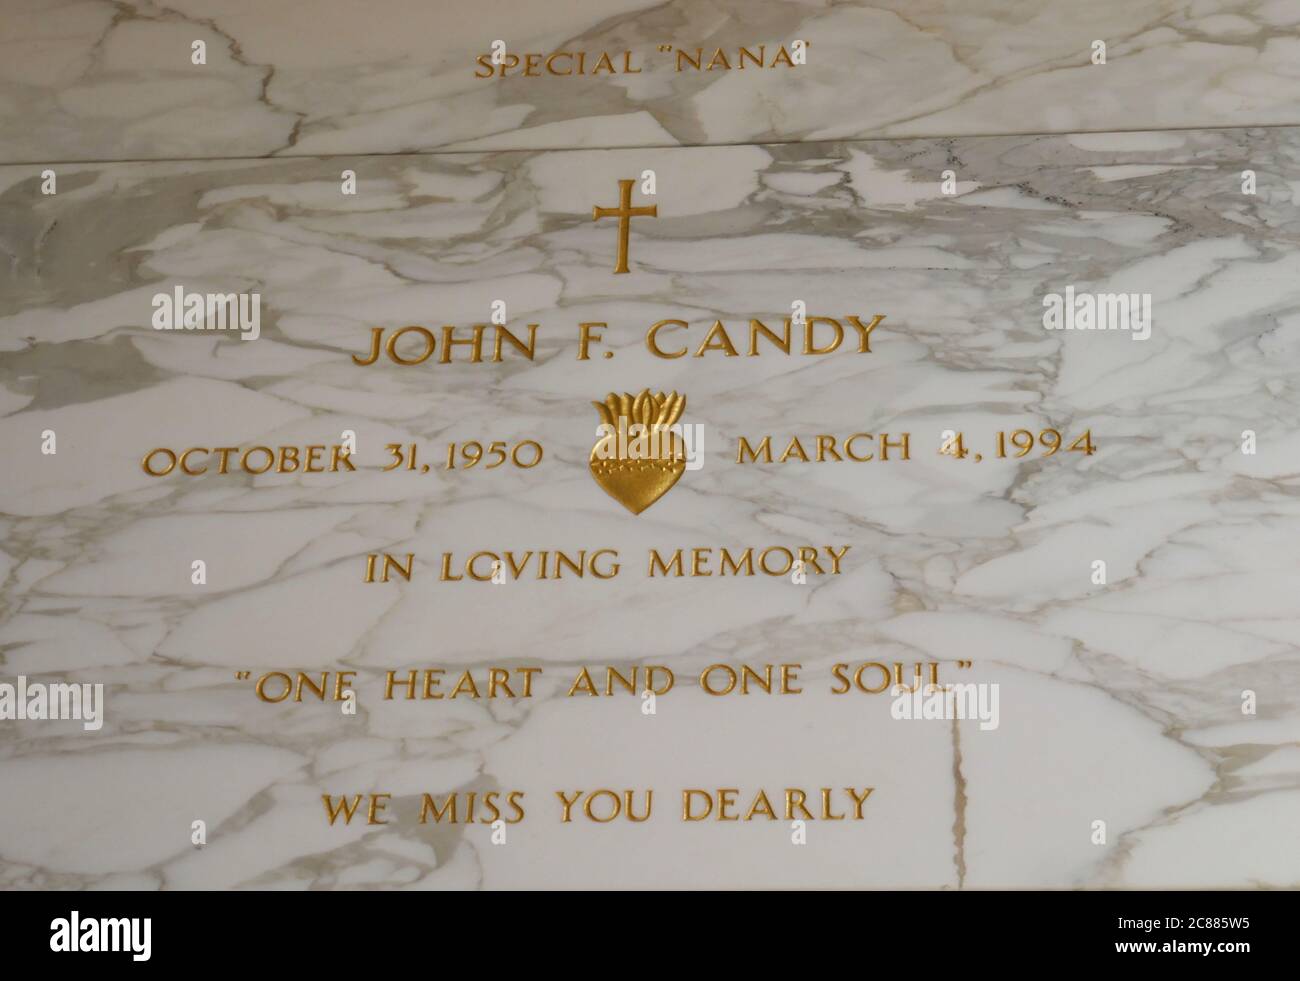 Culver City, California, USA 21st July 2020 A general view of atmosphere of John Candy's Grave in Mausoleum at Holy Cross Cemetery on July 21, 2020 in Culver City, California, USA. Photo by Barry King/Alamy Stock Photo Stock Photo